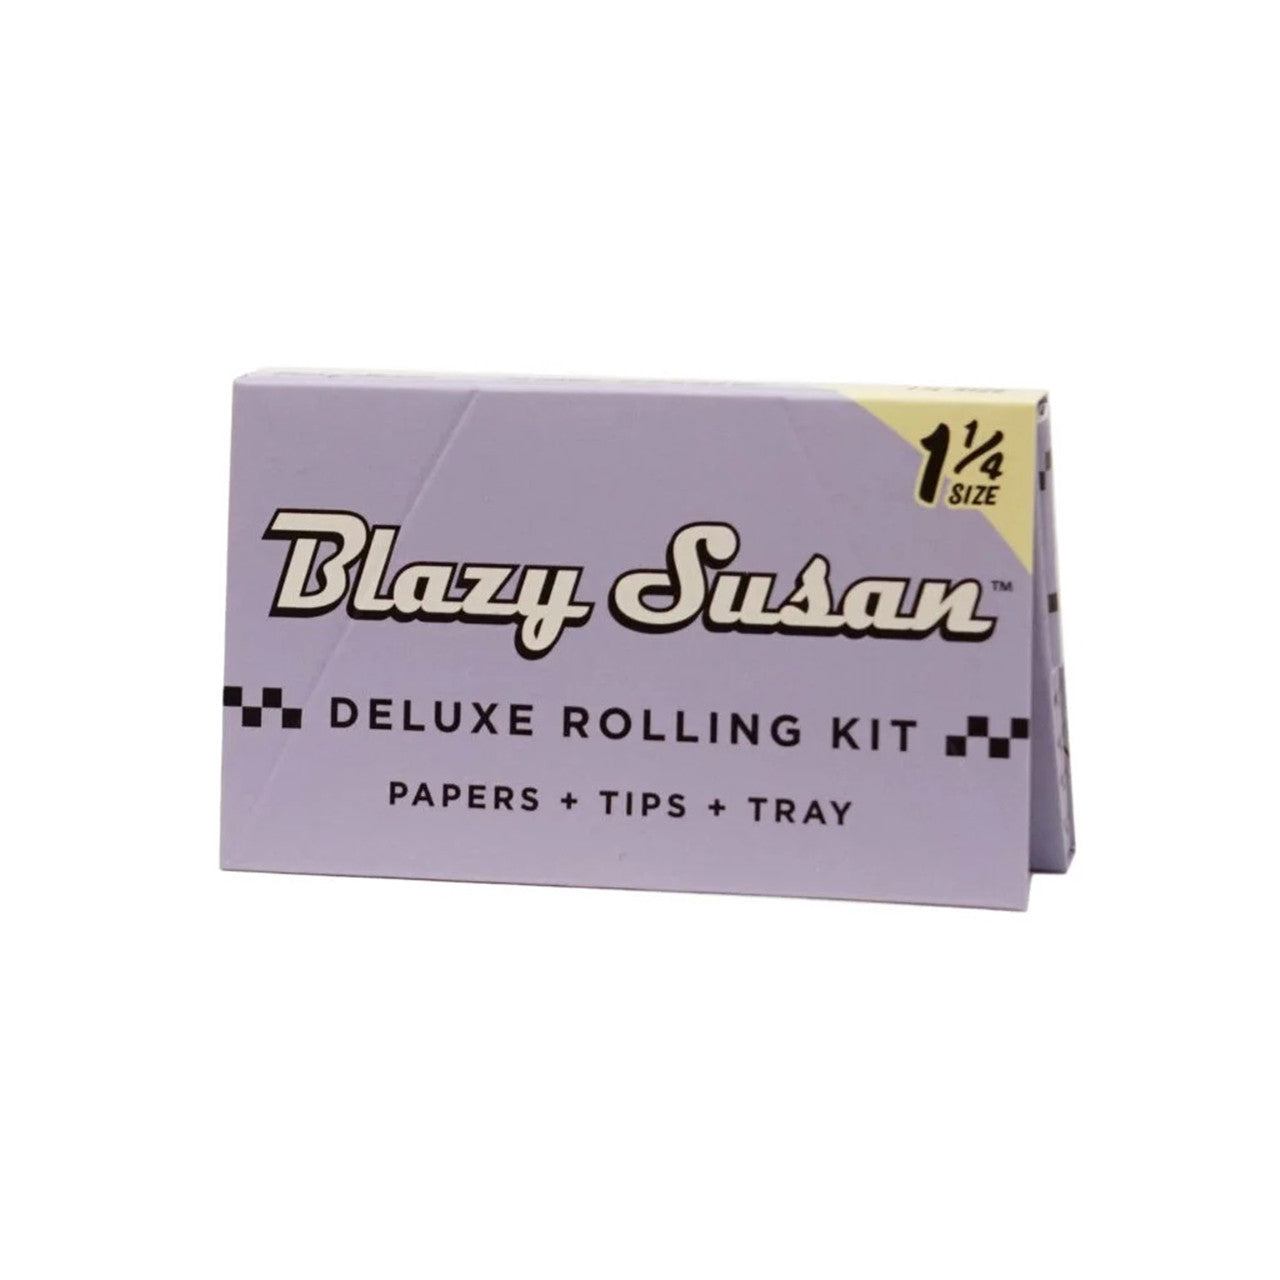 Blazy Susan Purple 1¼ Rolling Papers Deluxe Rolling Kit